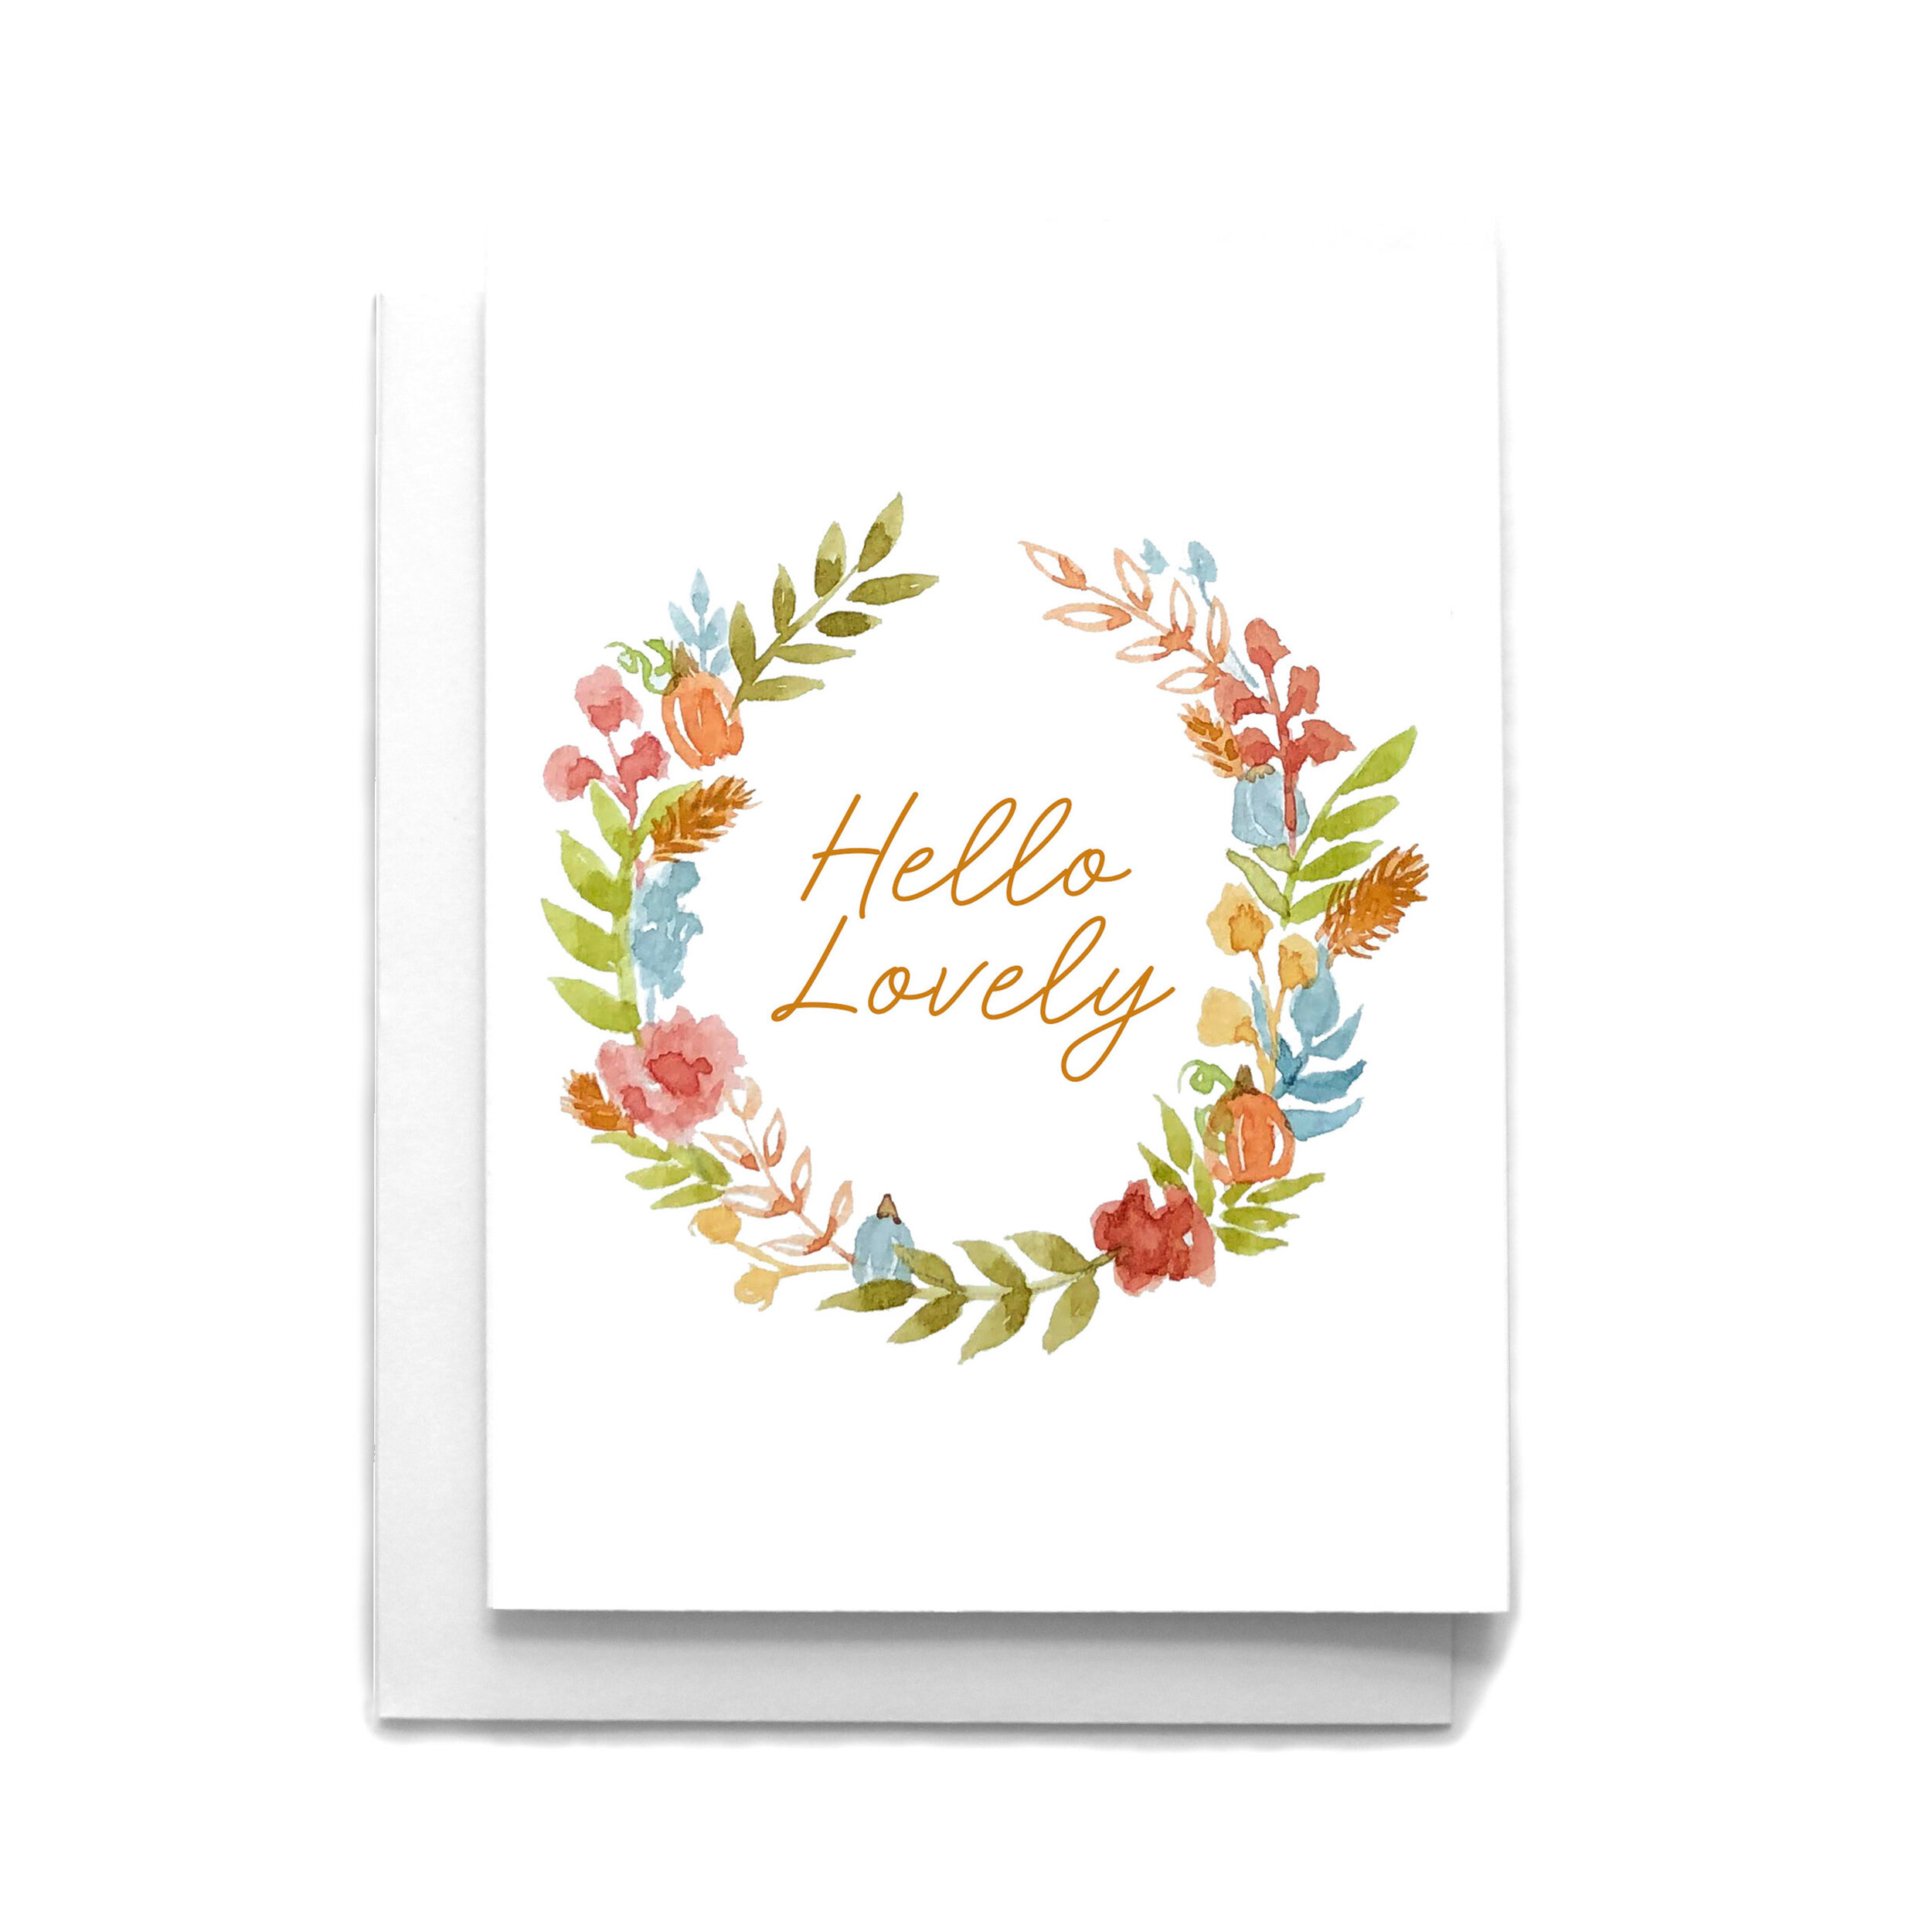 Hello Just Because Card Watercolor Card Blank Card Watercolor Print Card Welcoming Card